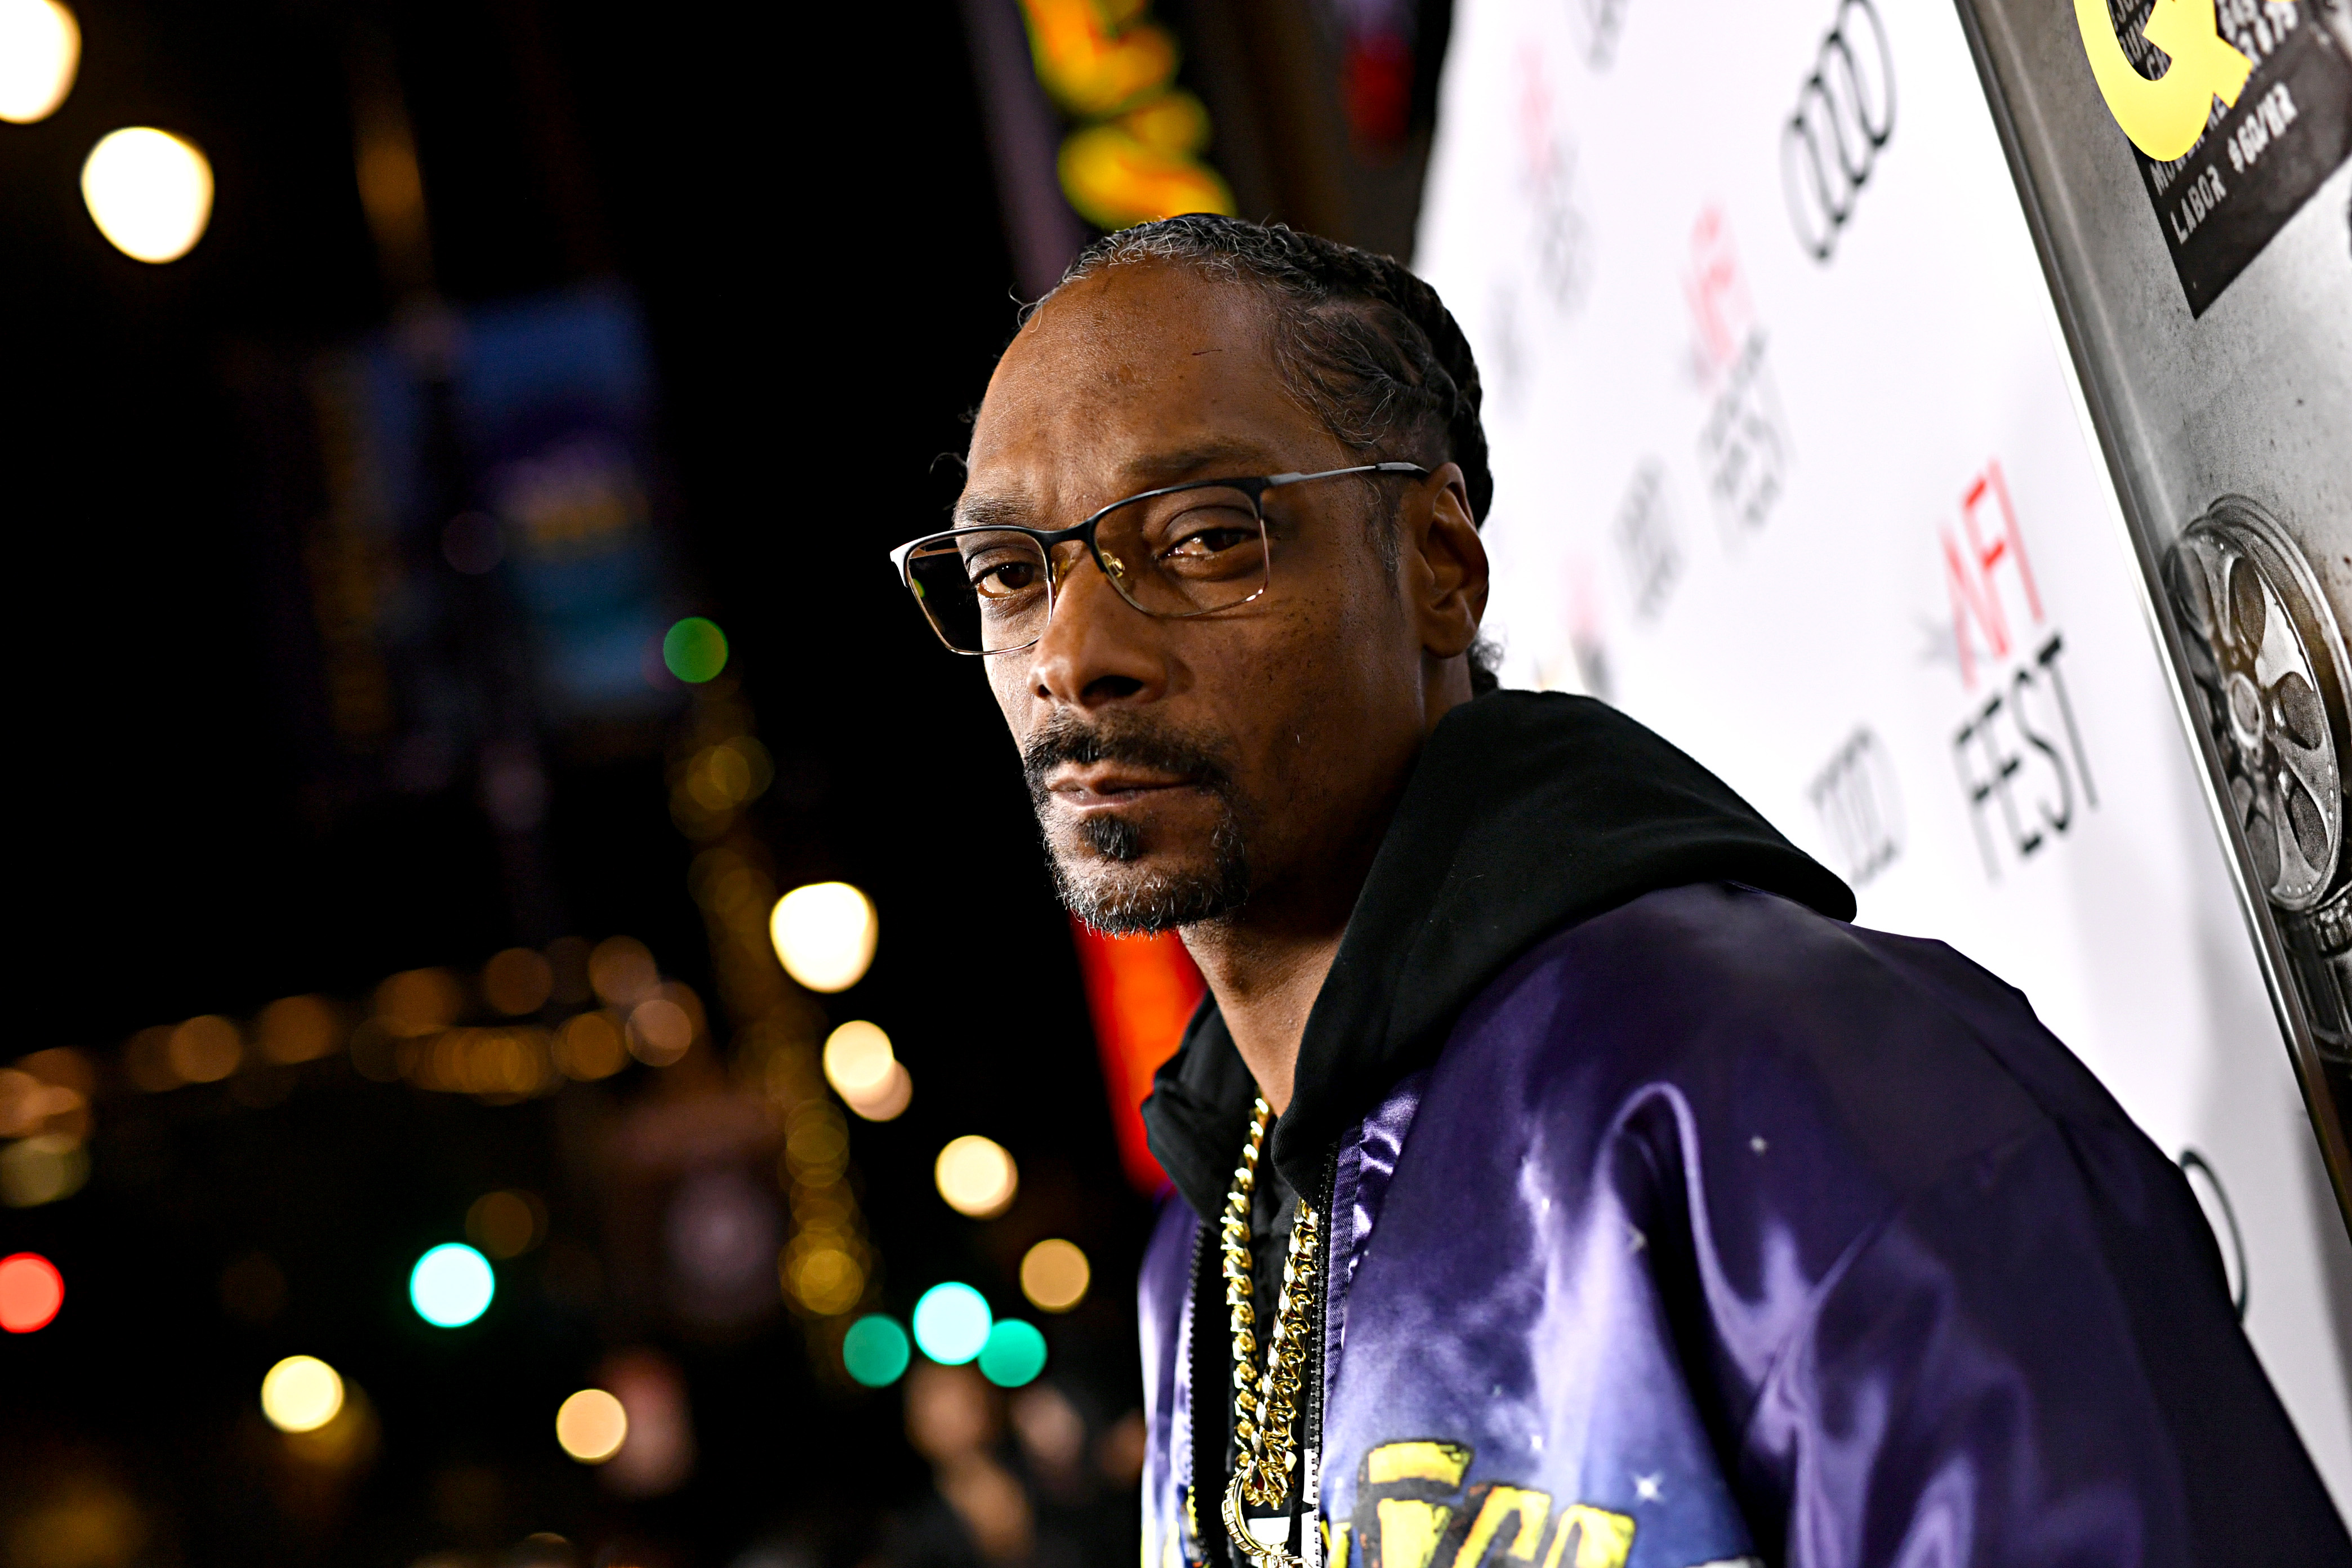 Snoop Dogg attends the "Queen & Slim" Premiere at AFI FEST 2019 presented by Audi at the TCL Chinese Theatre on November 14, 2019, in Hollywood, California. | Source: Getty Images